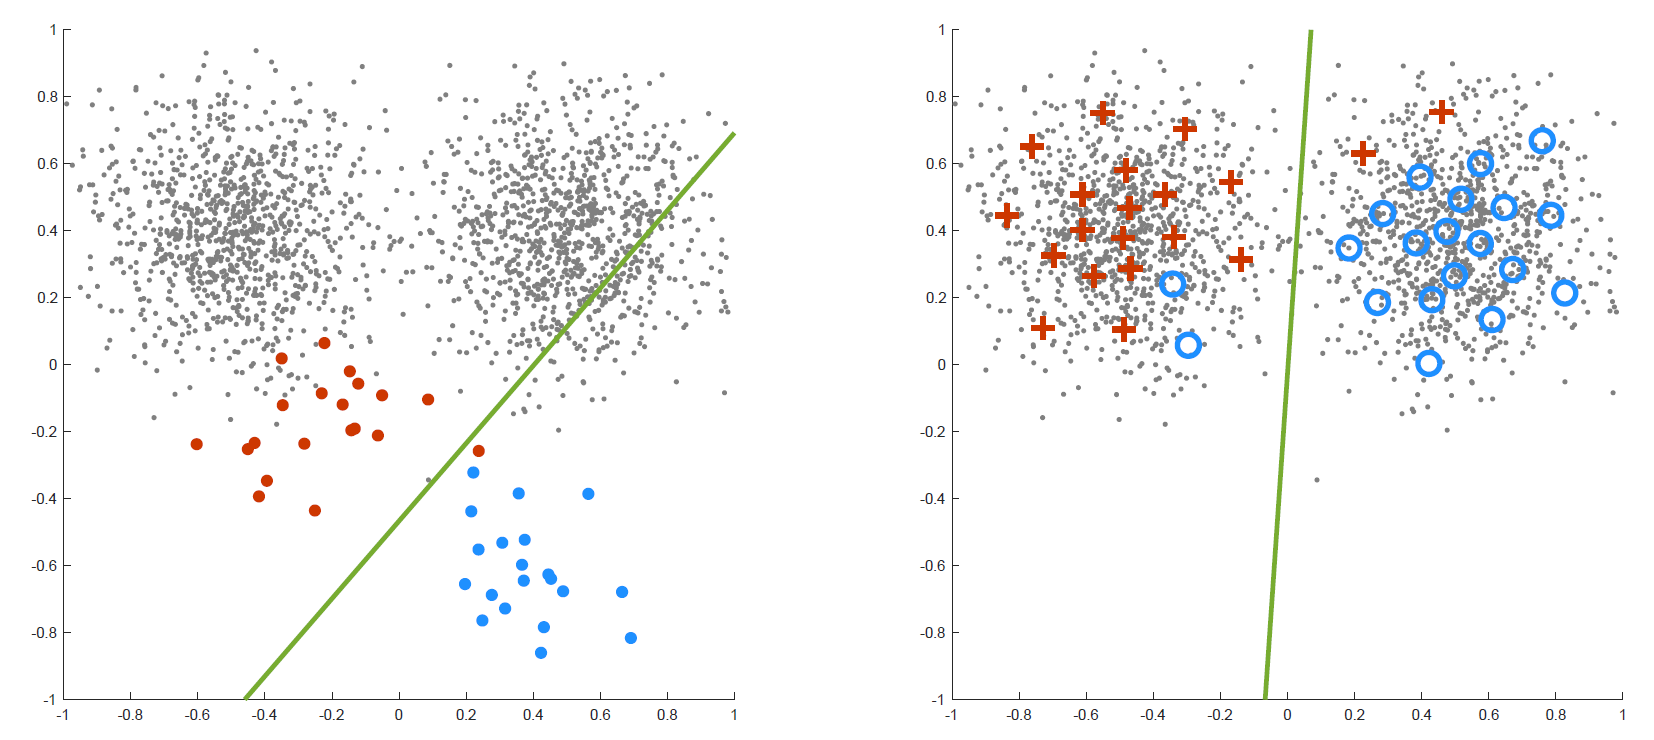 A new clustering method which solves the k-means clustering problem with variational optimal transportation. It leverages power Voronoi diagram to aggregate empirical observations into a fixed number of Voronoi cells while maintaining the minimum transportation cost and preliminary results have shown its applications in domain adaptation, remeshing, and representation learning.